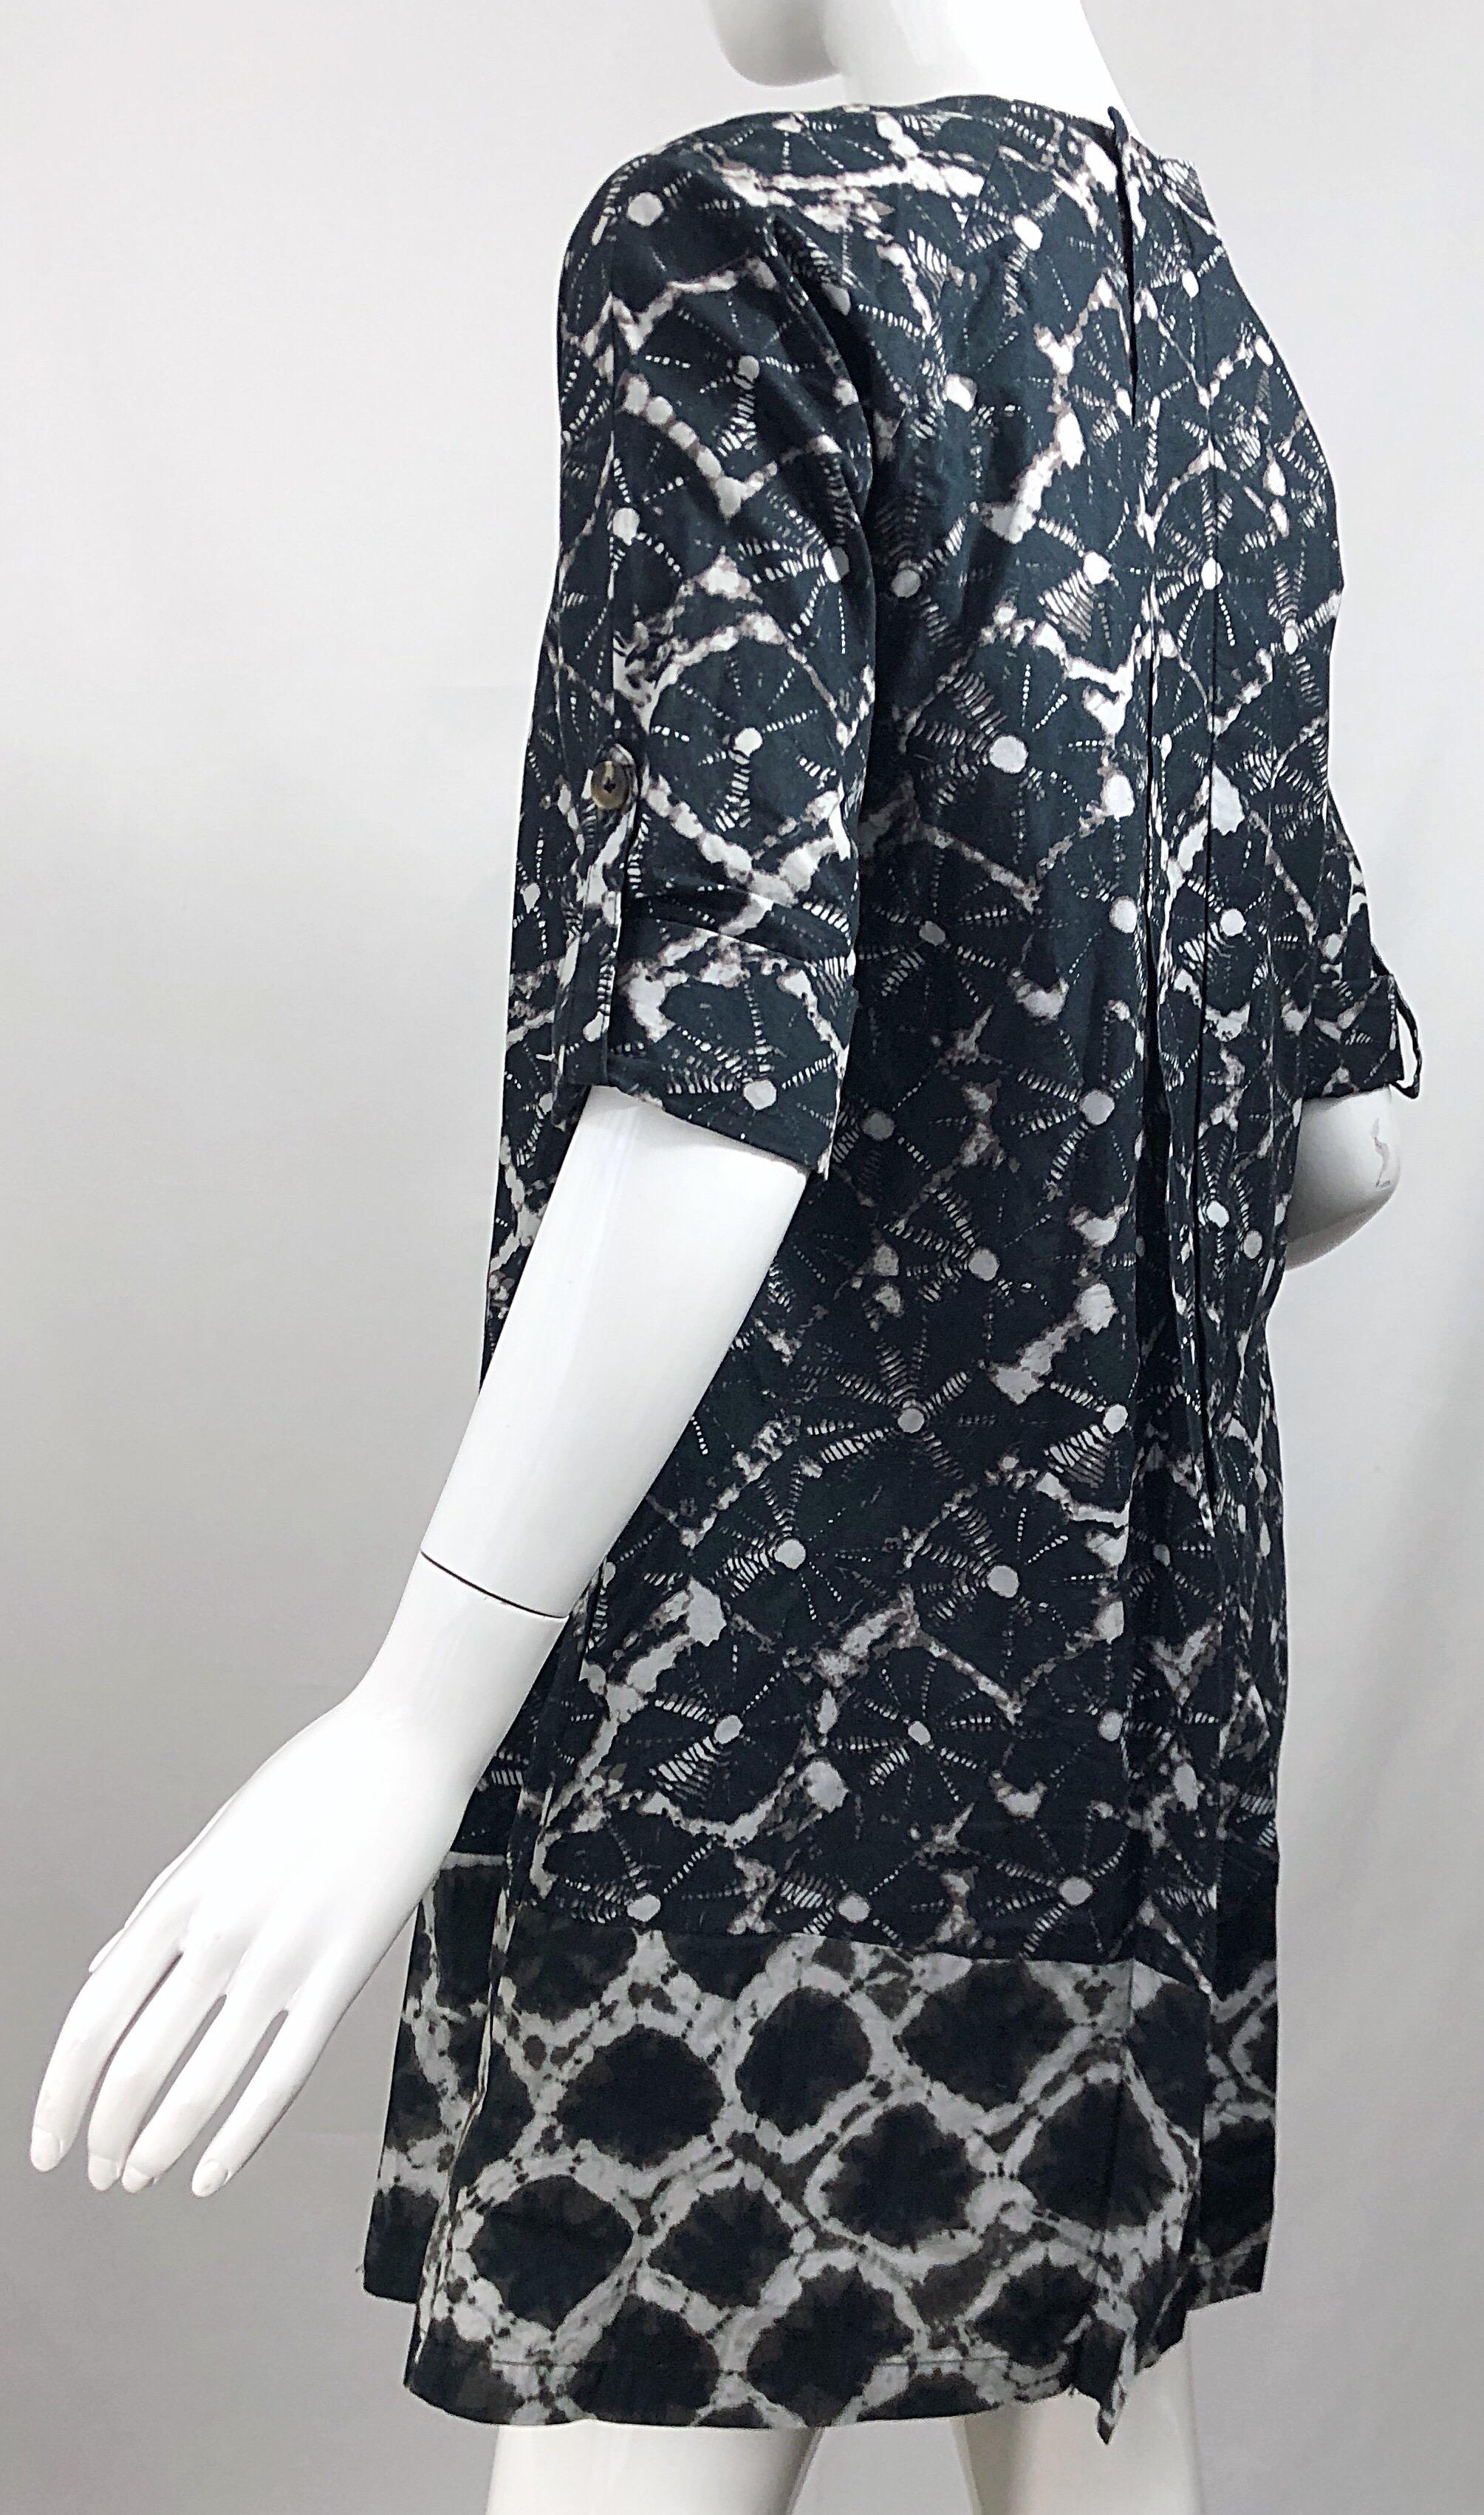 Thakoon Spring 2008 Black White Abstract Tie Dye Trapeze Swing Dress Jacket For Sale 1